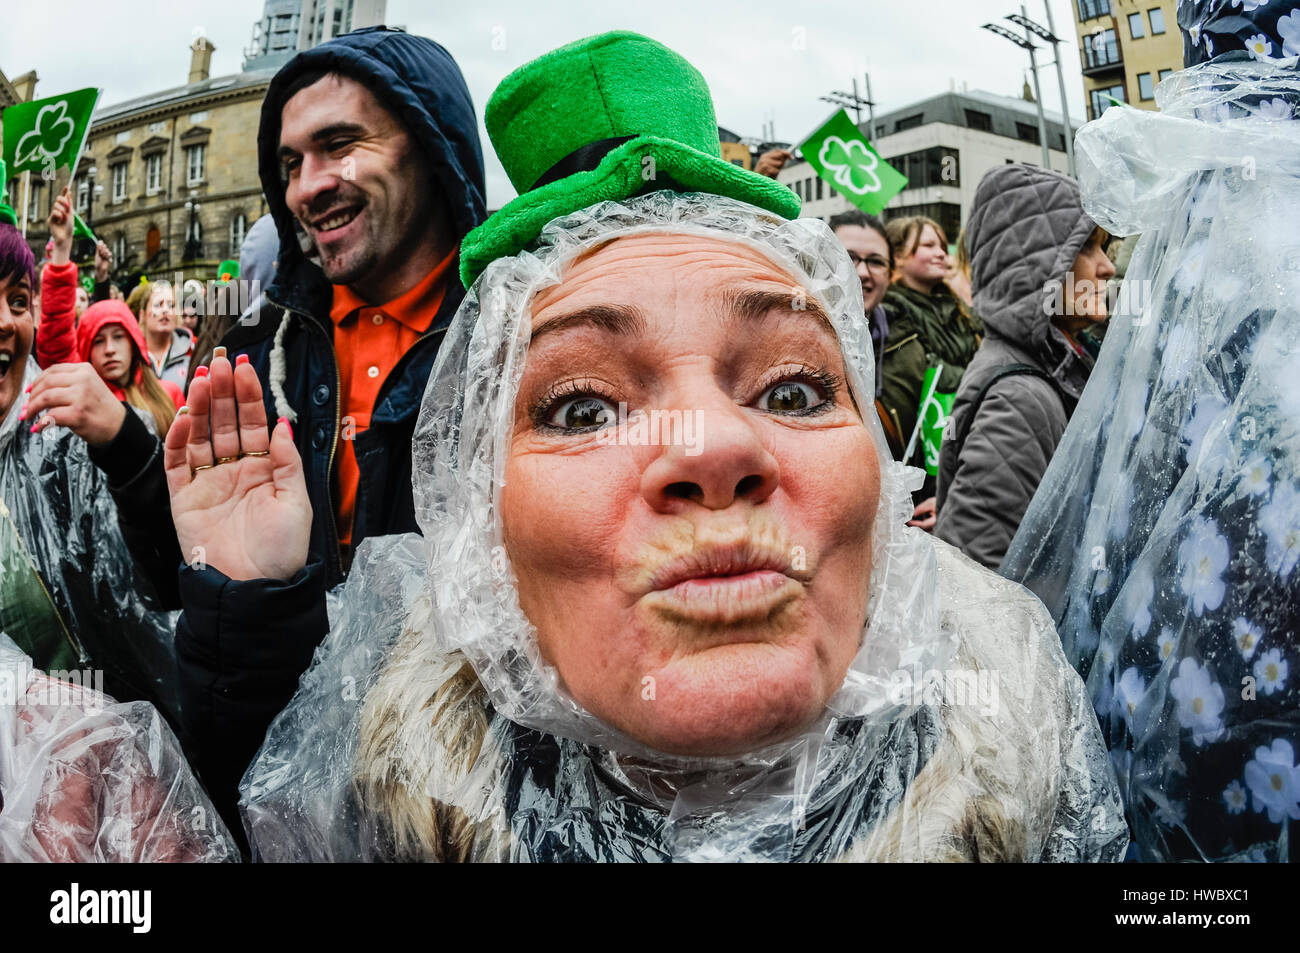 Belfast, Northern Ireland. 17 Mar 2016 - A woman puckers up for a kiss while wearing a green Leprachaun hat, as people in Belfast celebrate Saint Patrick's Day. Stock Photo